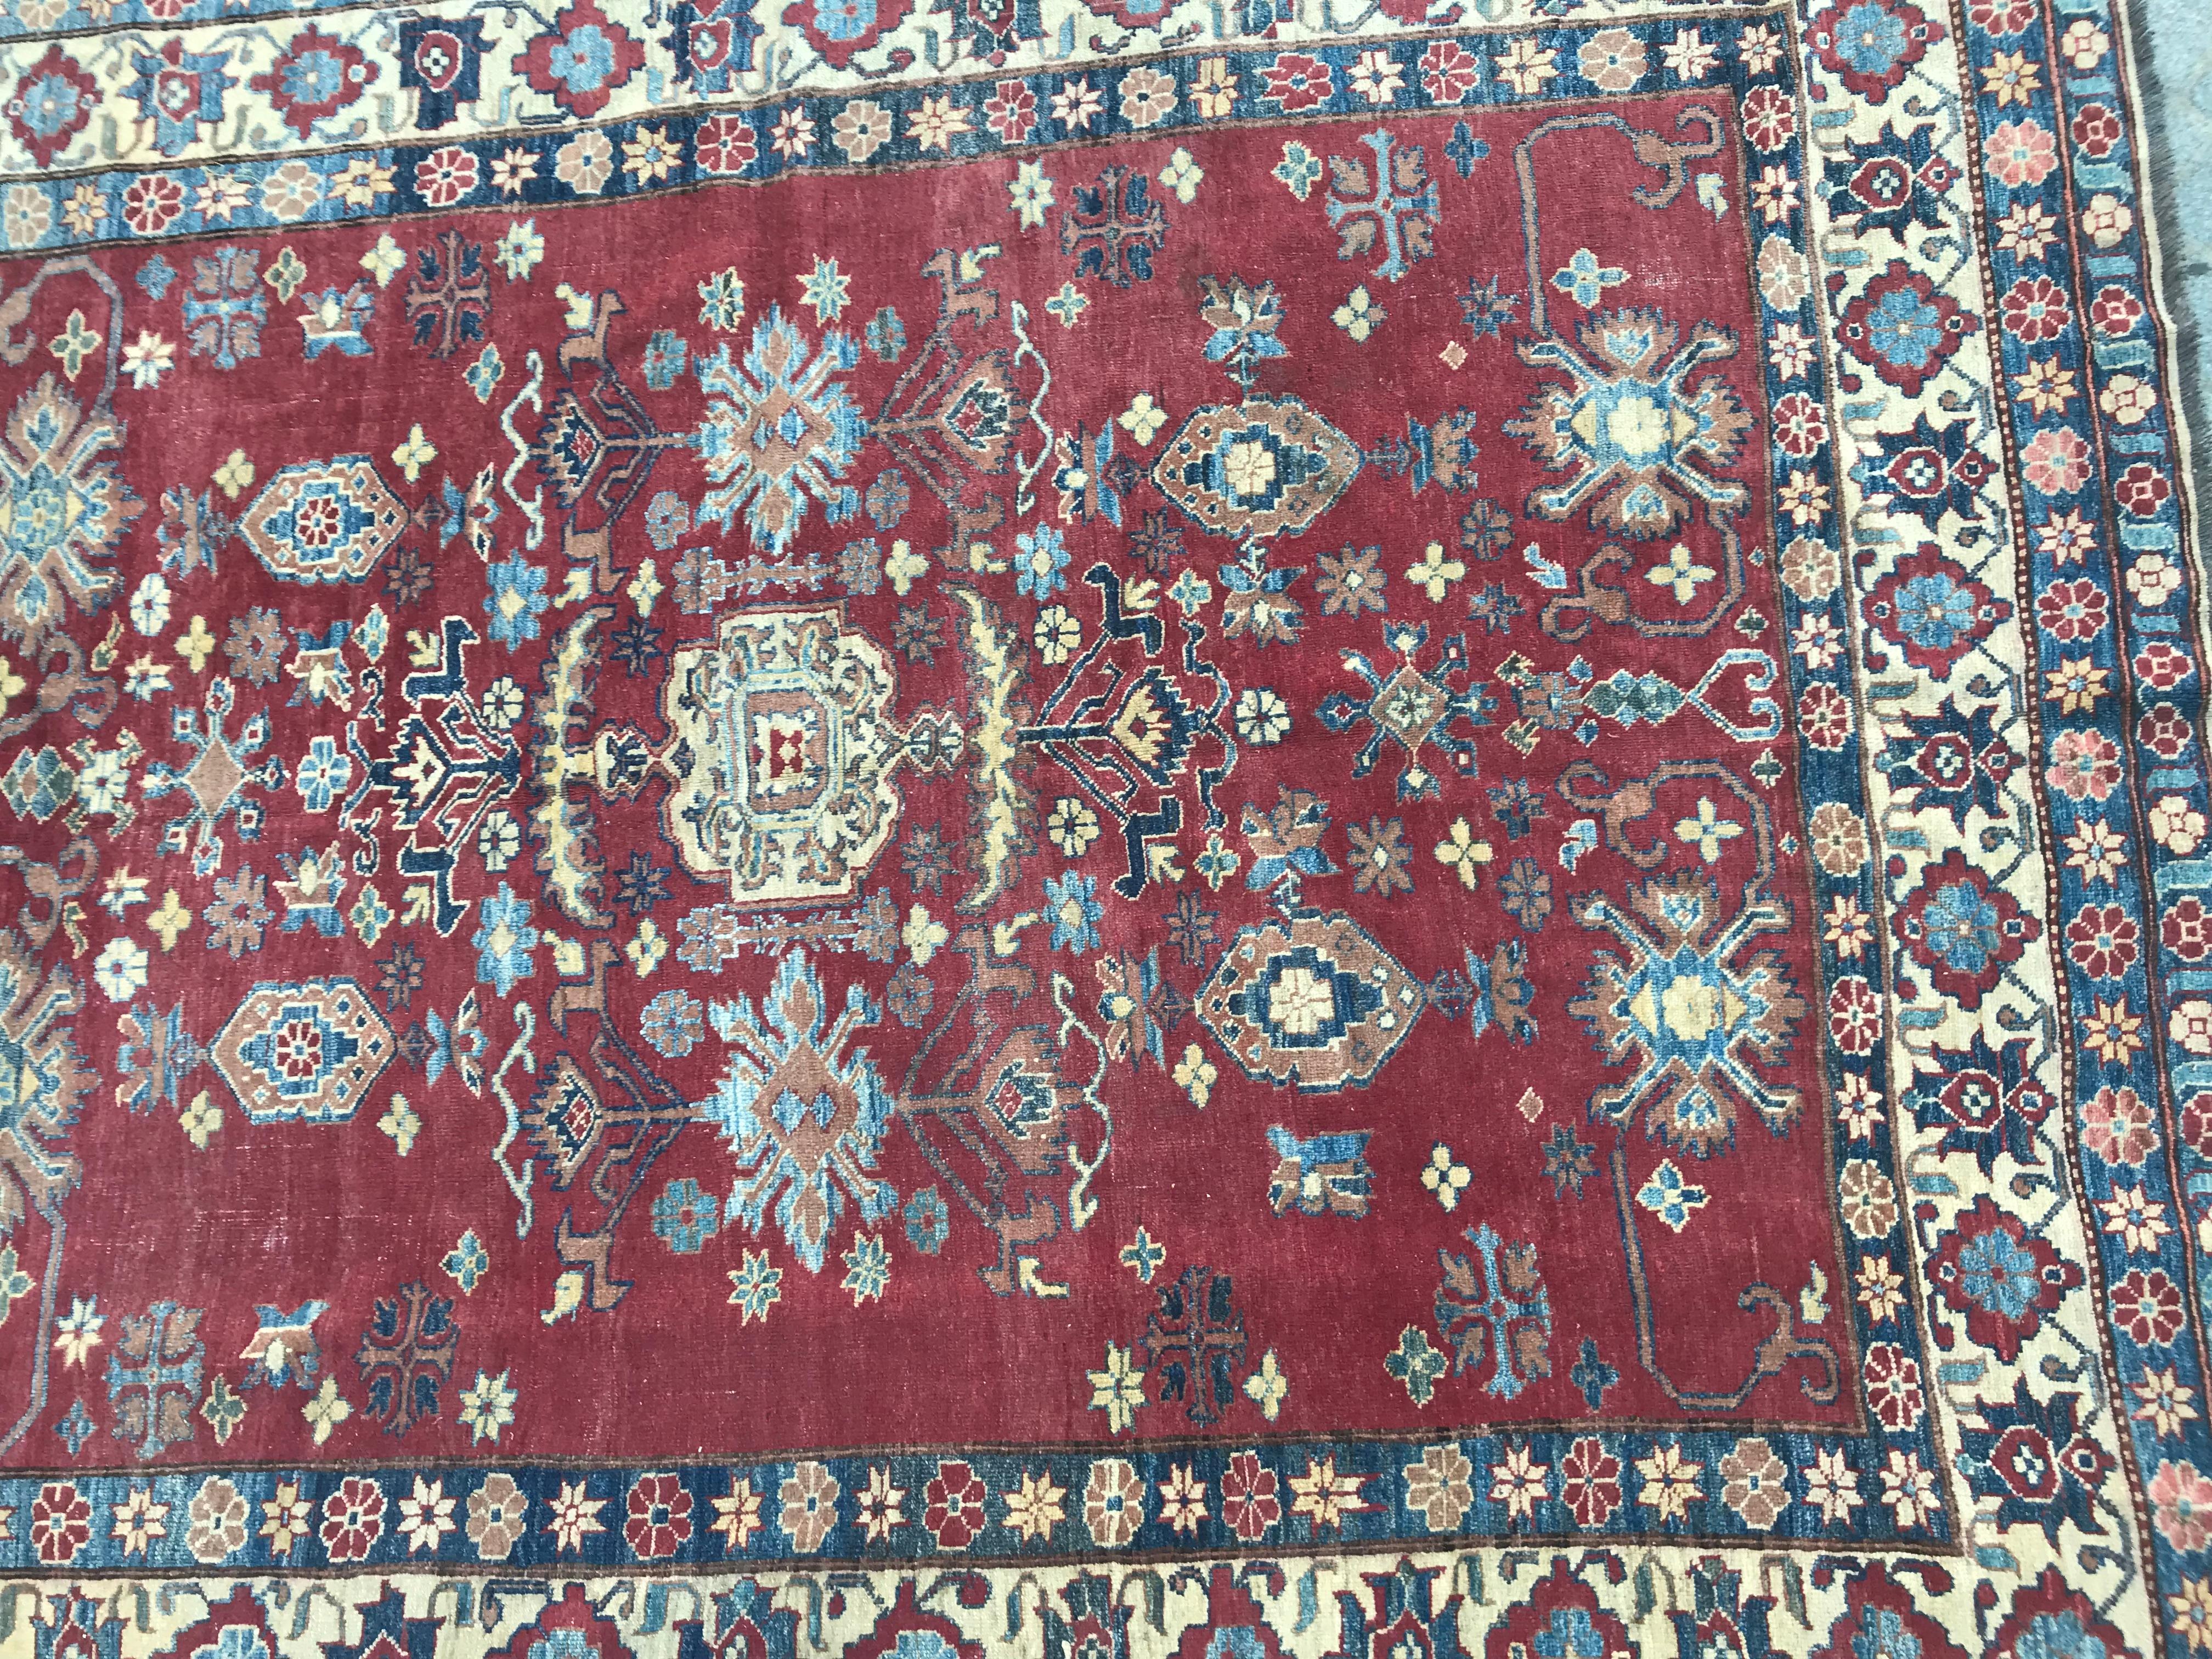 Beautiful Afghan rug, Persian Sultanabad design, with nice colors with red, blue, beige and purple, early 21st century, entirely hand knotted with wool velvet on cotton foundation.

✨✨✨
